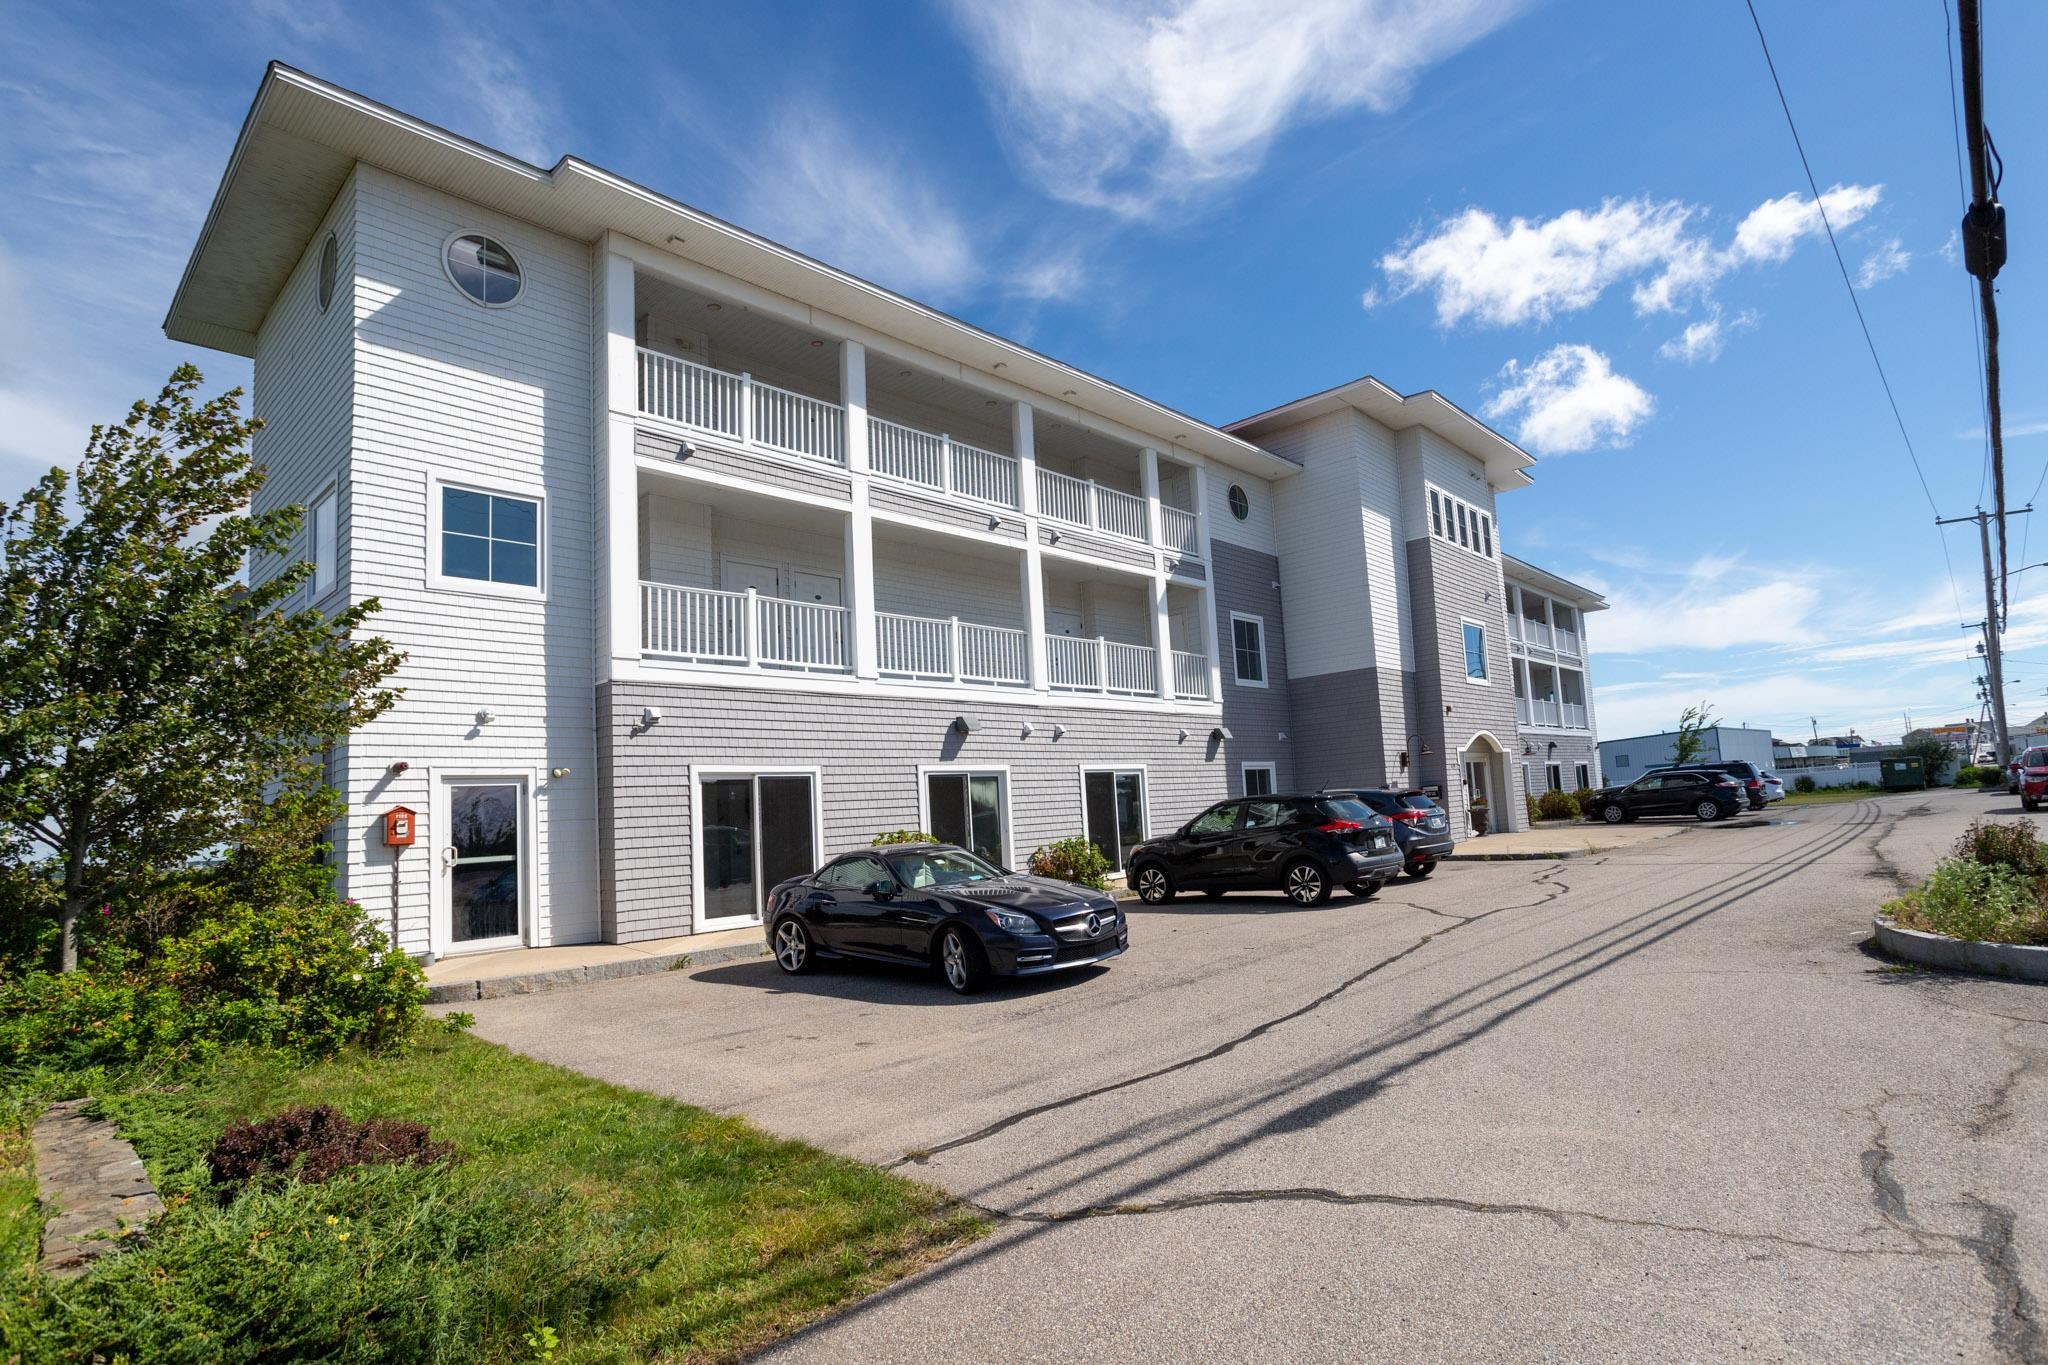 MLS 4991976: 419 State Route 286-Unit 306, Seabrook NH